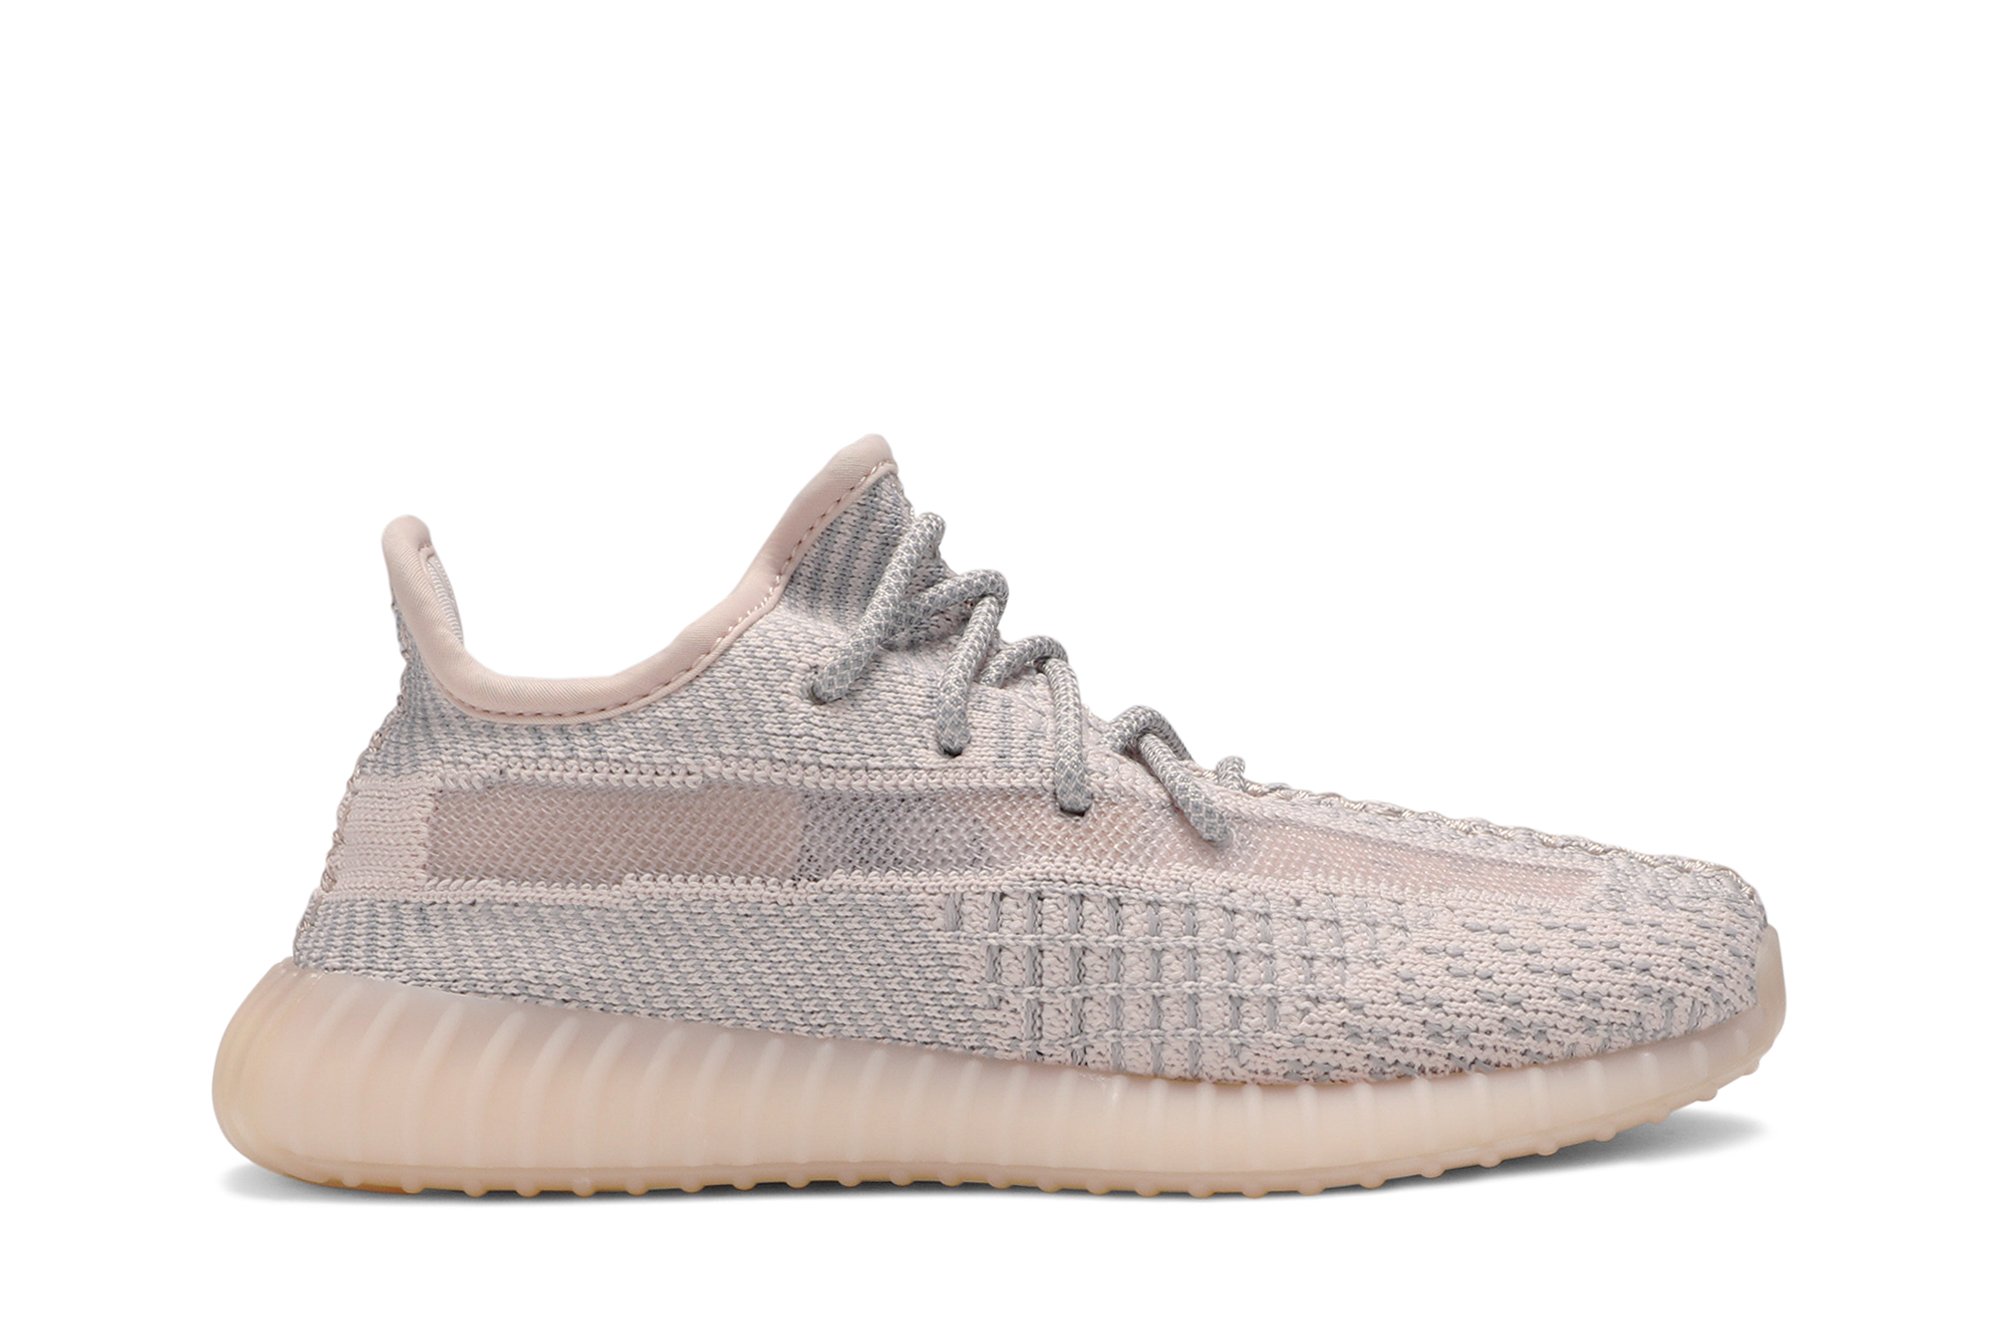 Yeezy Boost 350 V2 'Synth Non-Reflective' | GOAT